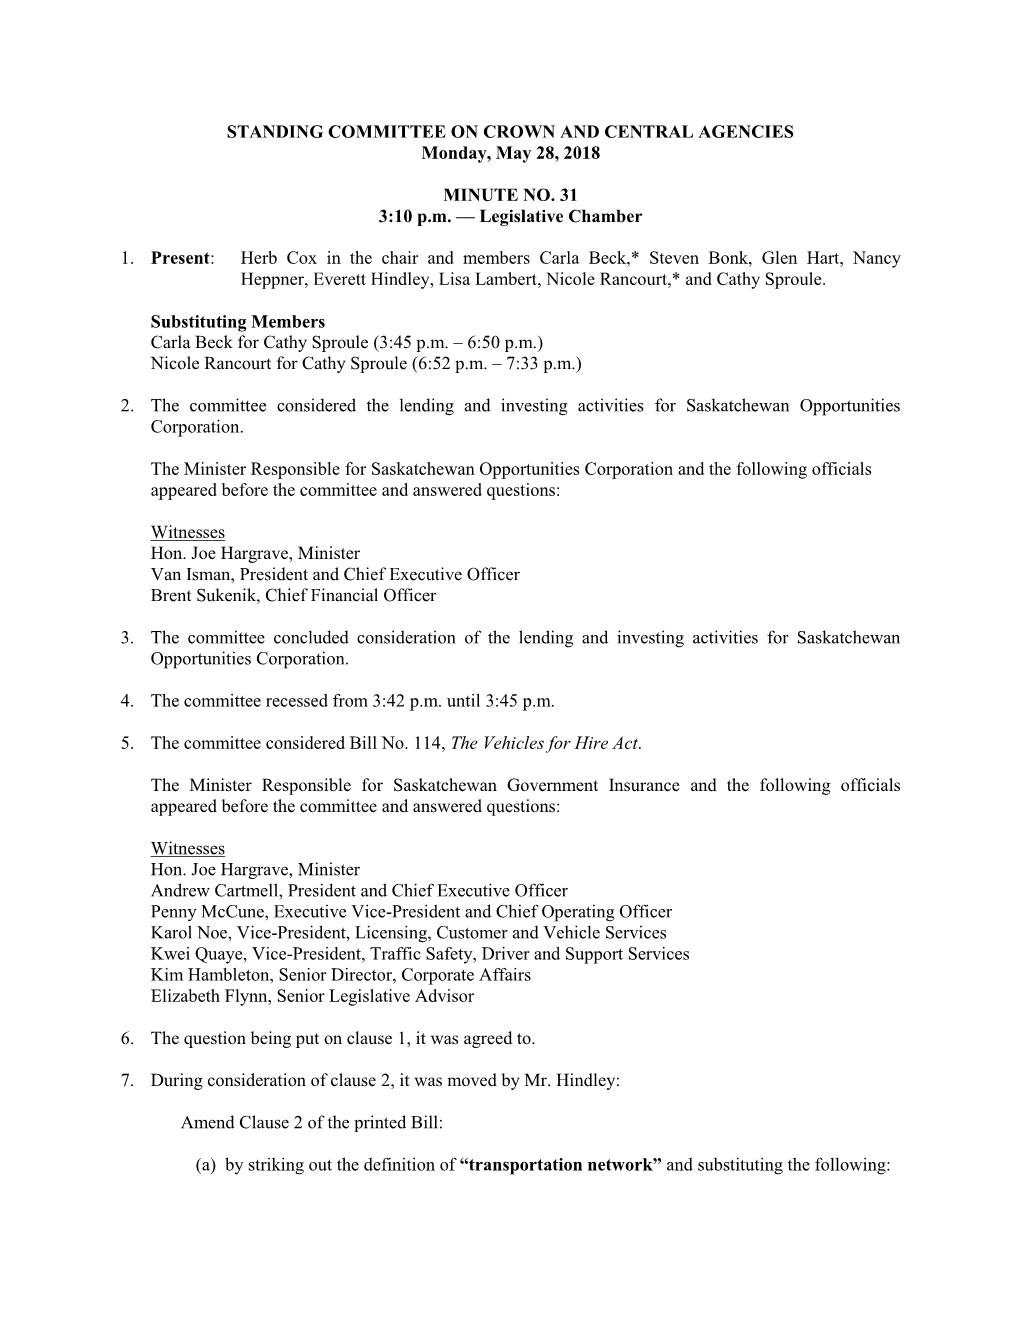 Standing Committee on Human Services